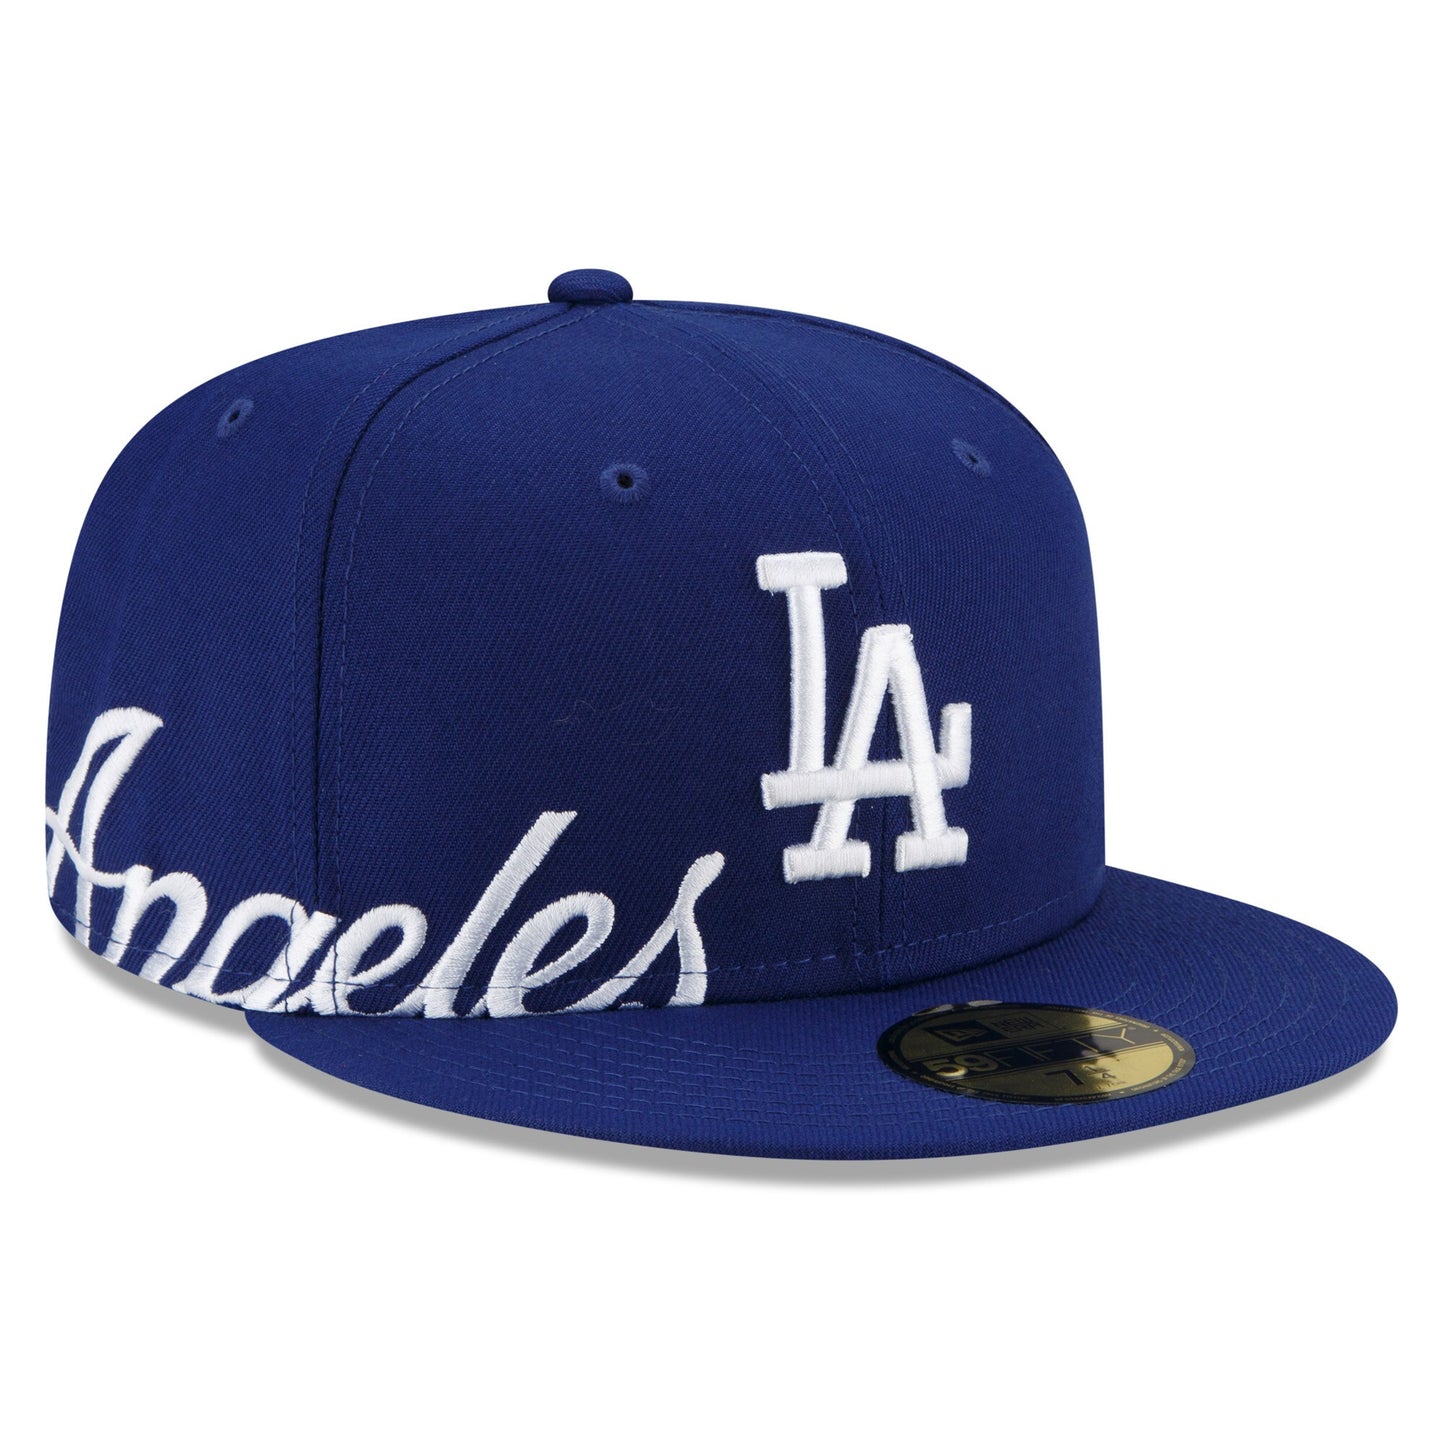 Men's Los Angeles Dodgers New Era Royal Sidesplit 59FIFTY Fitted Hat